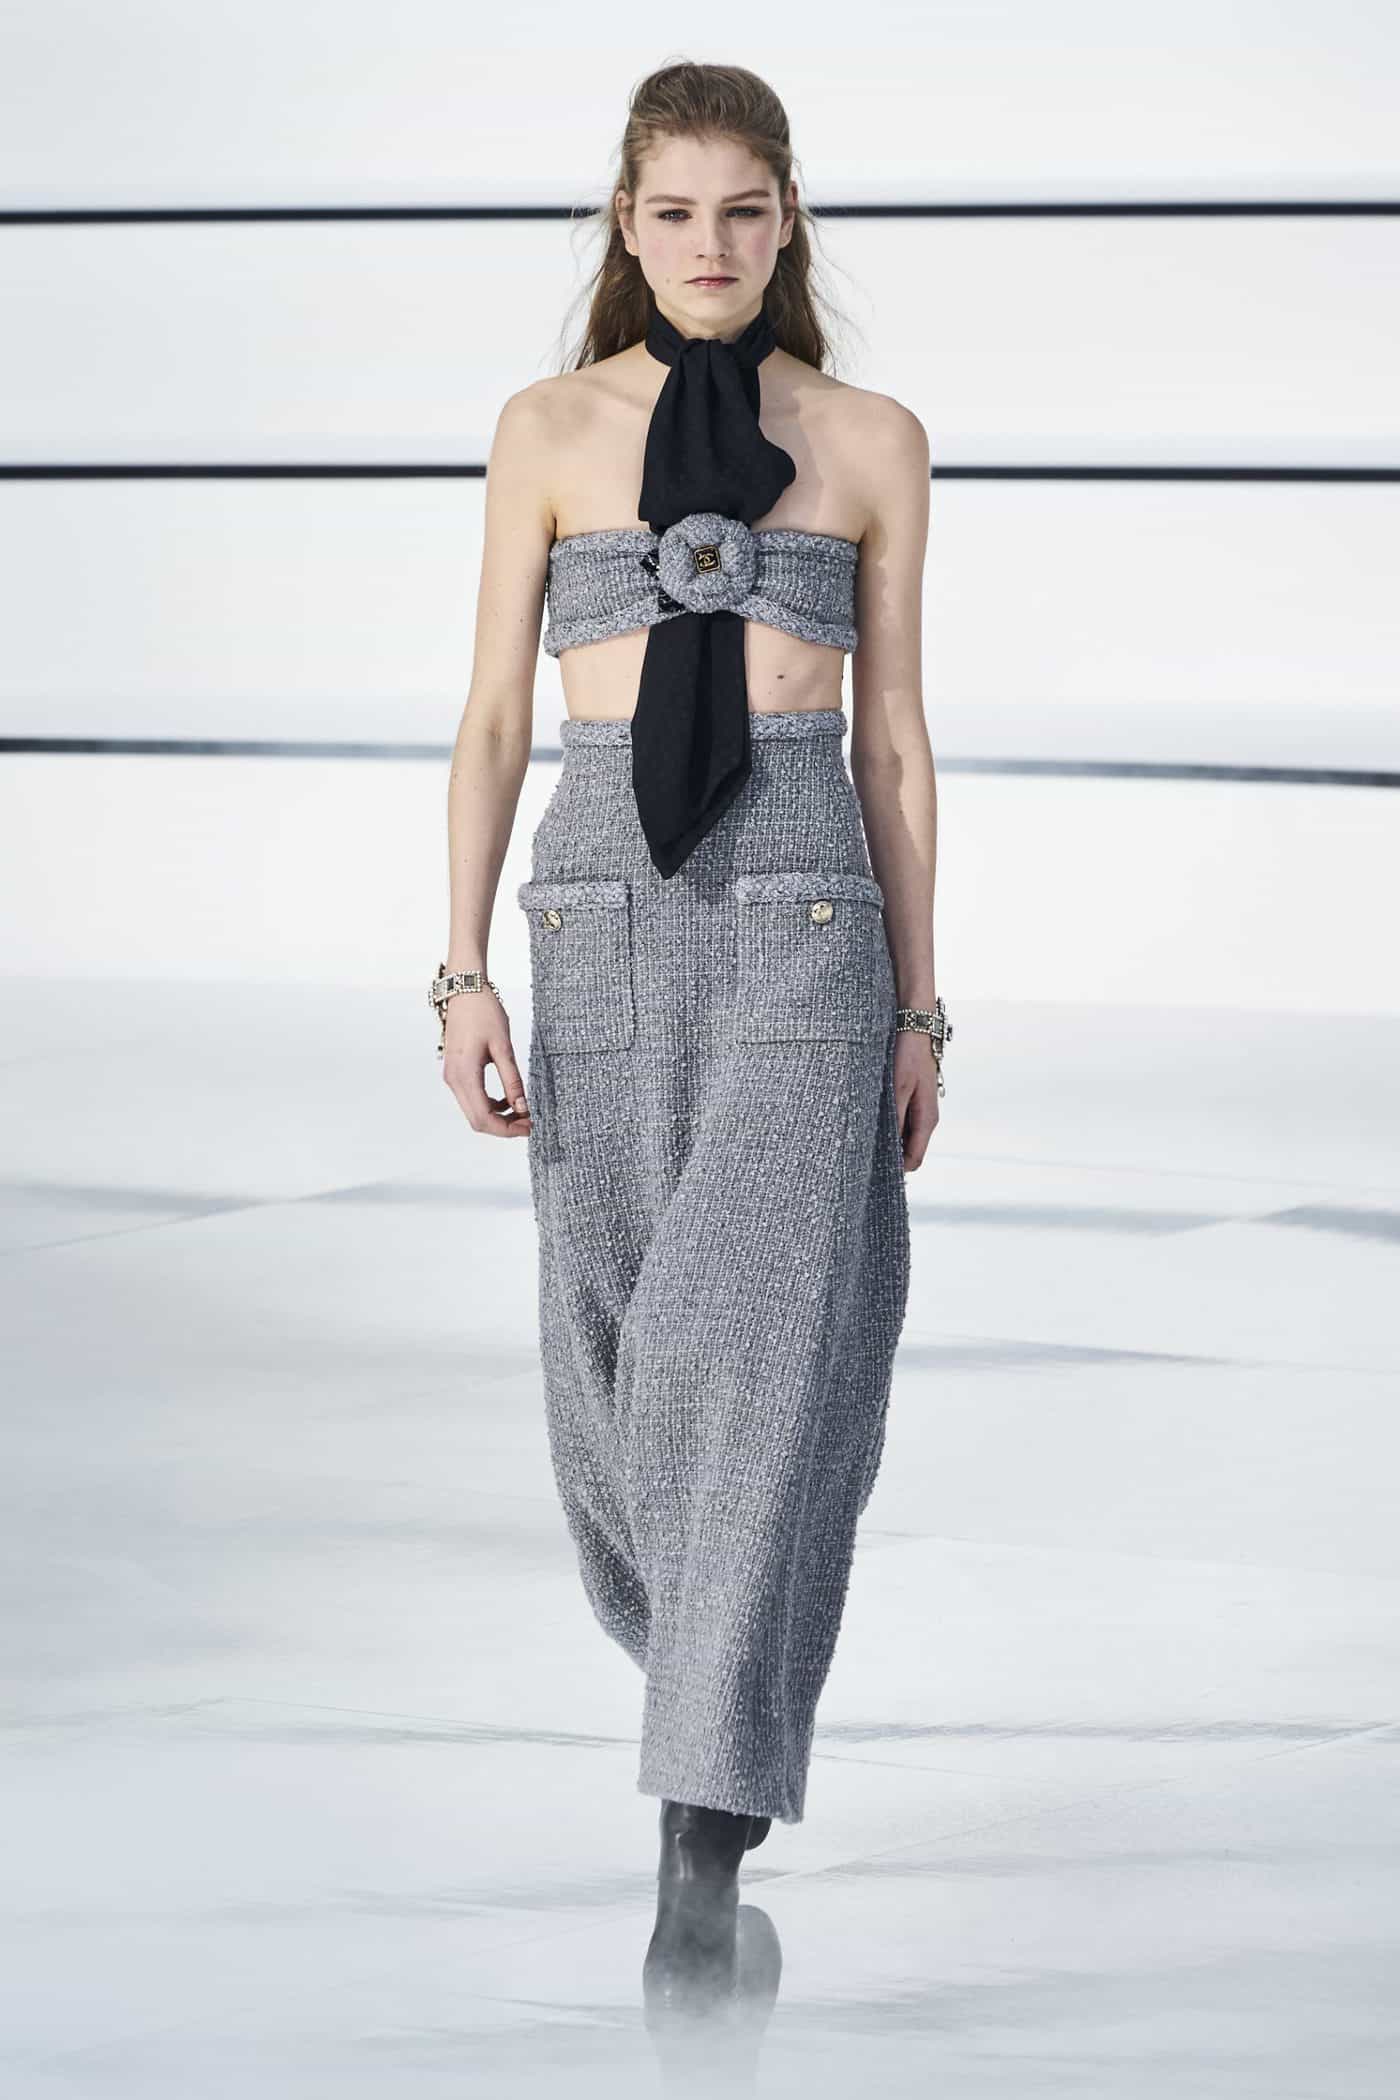 Chanel haute couture makes a subdued ode to Parisian elegance in